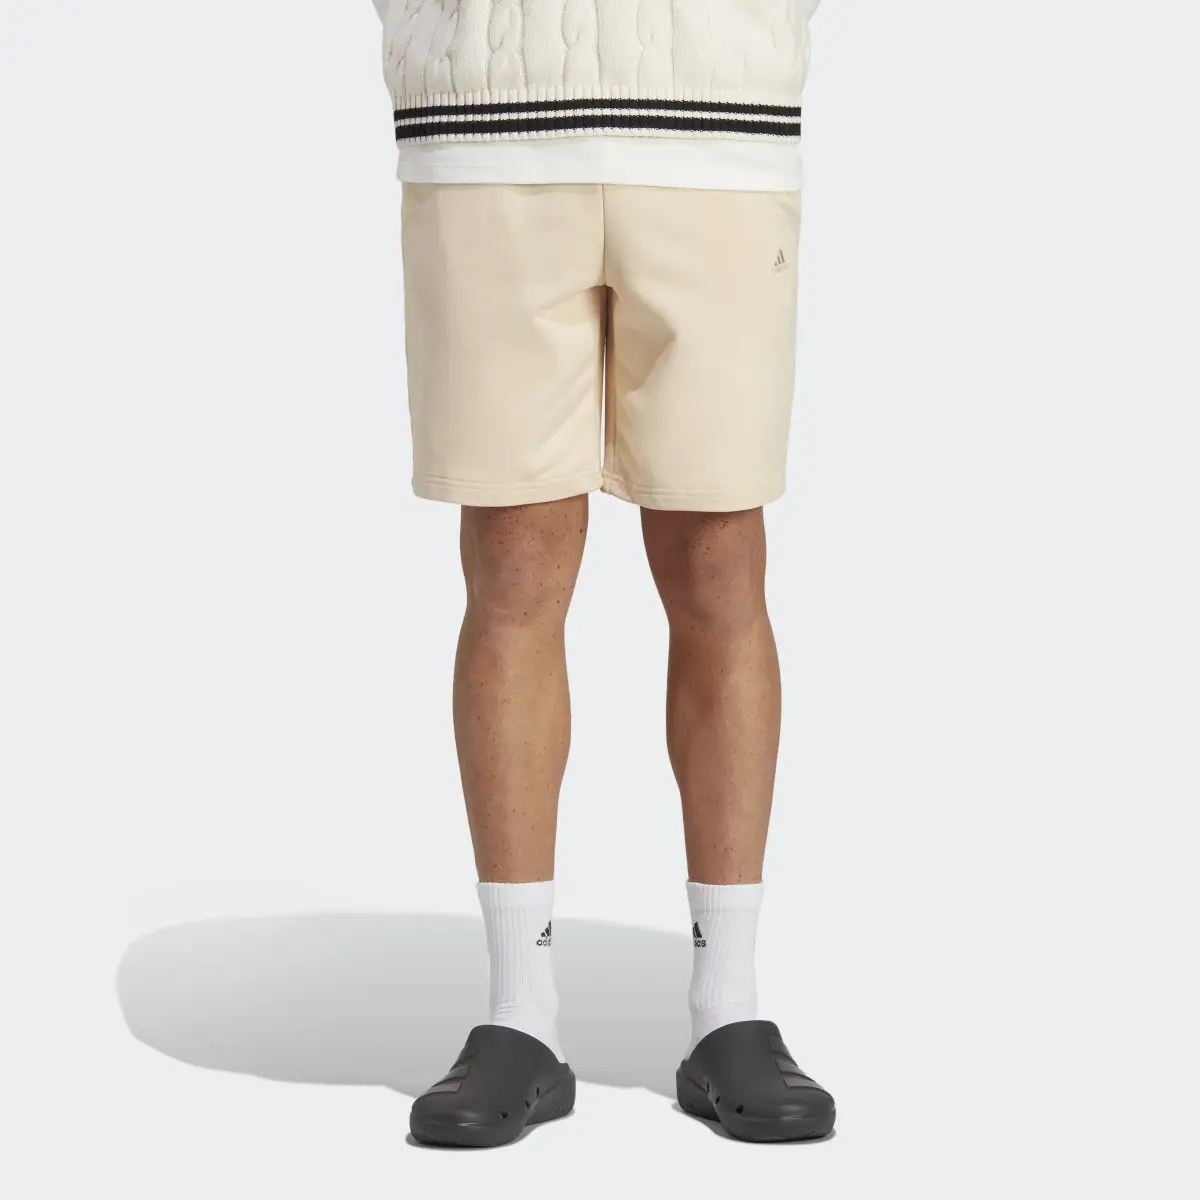 Adidas ALL SZN French Terry Shorts. 1